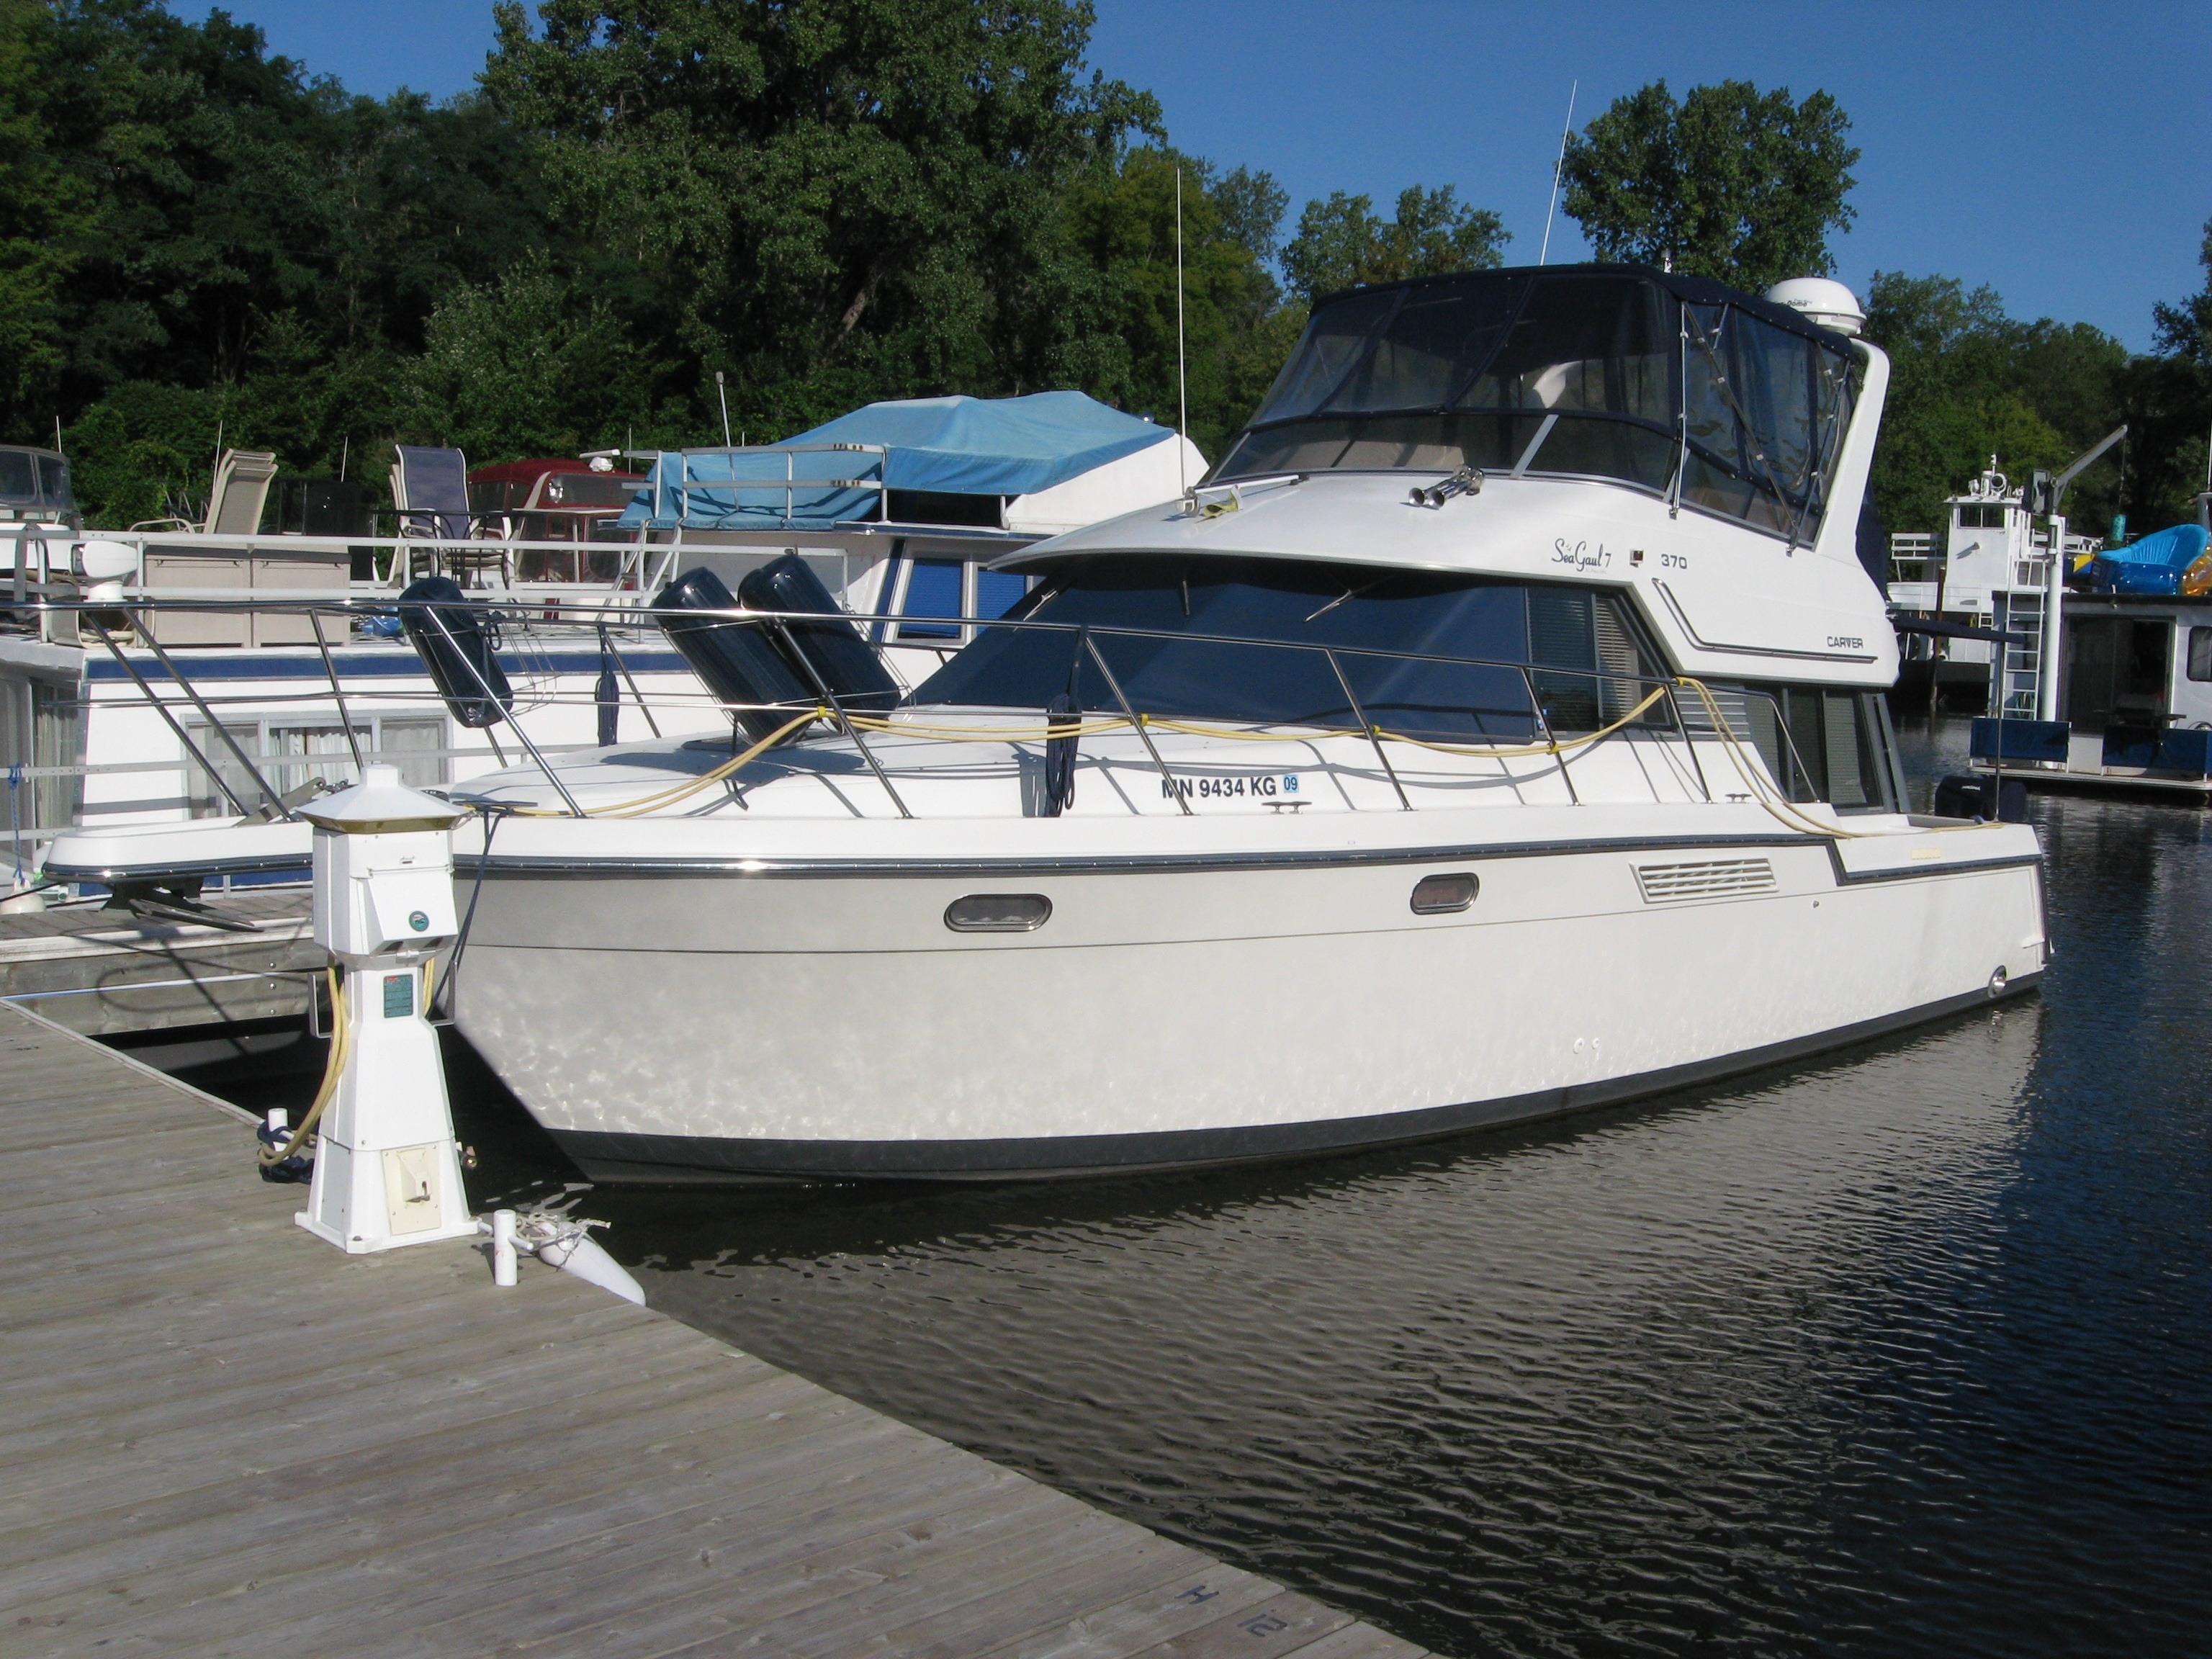 Carver 370 Voyager, Twin Cities